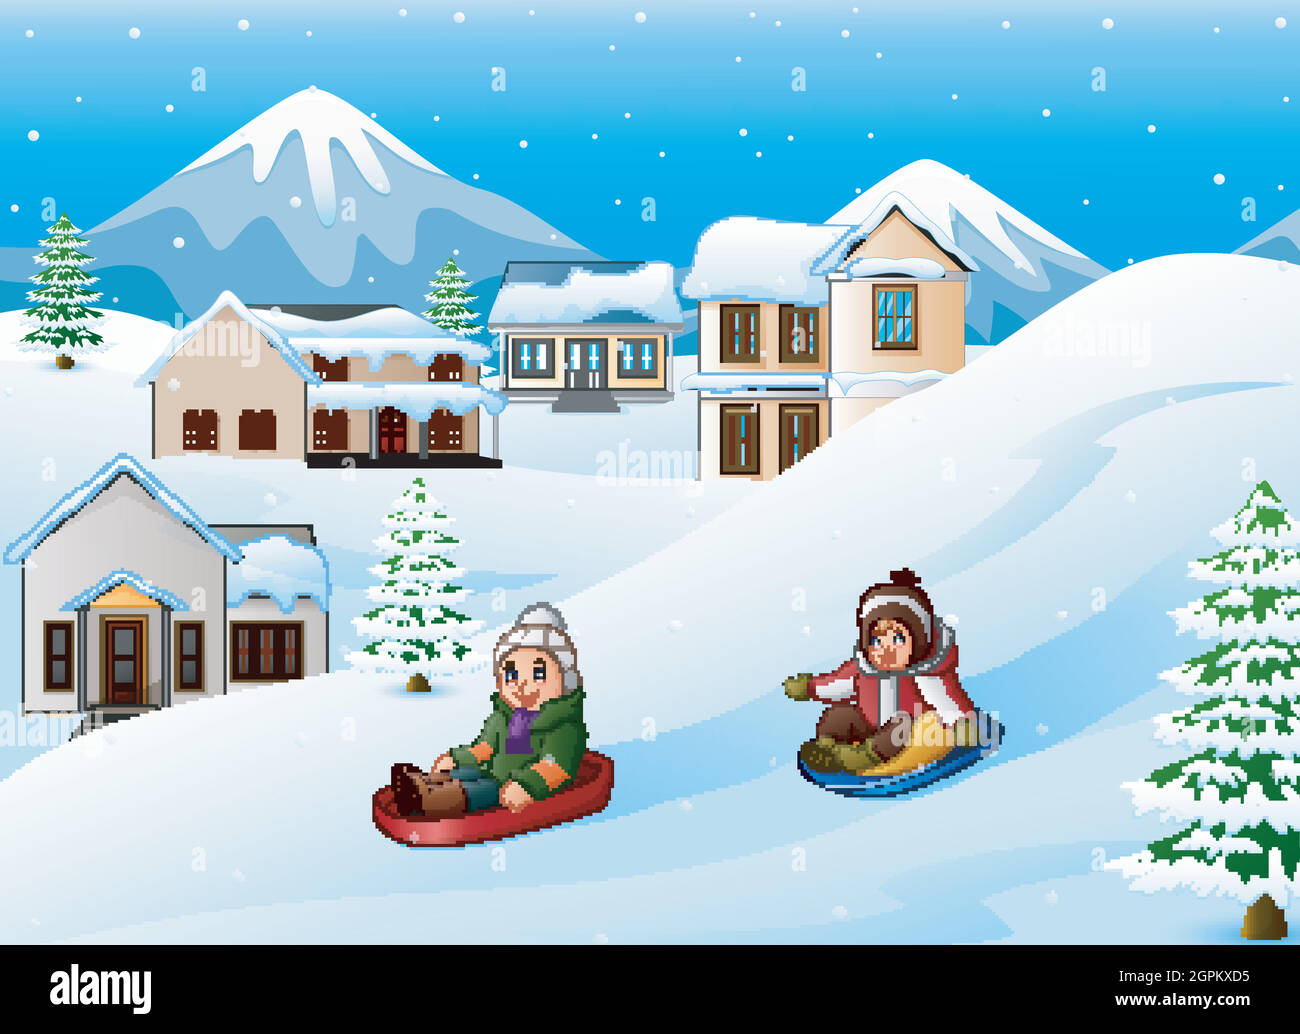 Children playing sledding in the snow Stock Vector